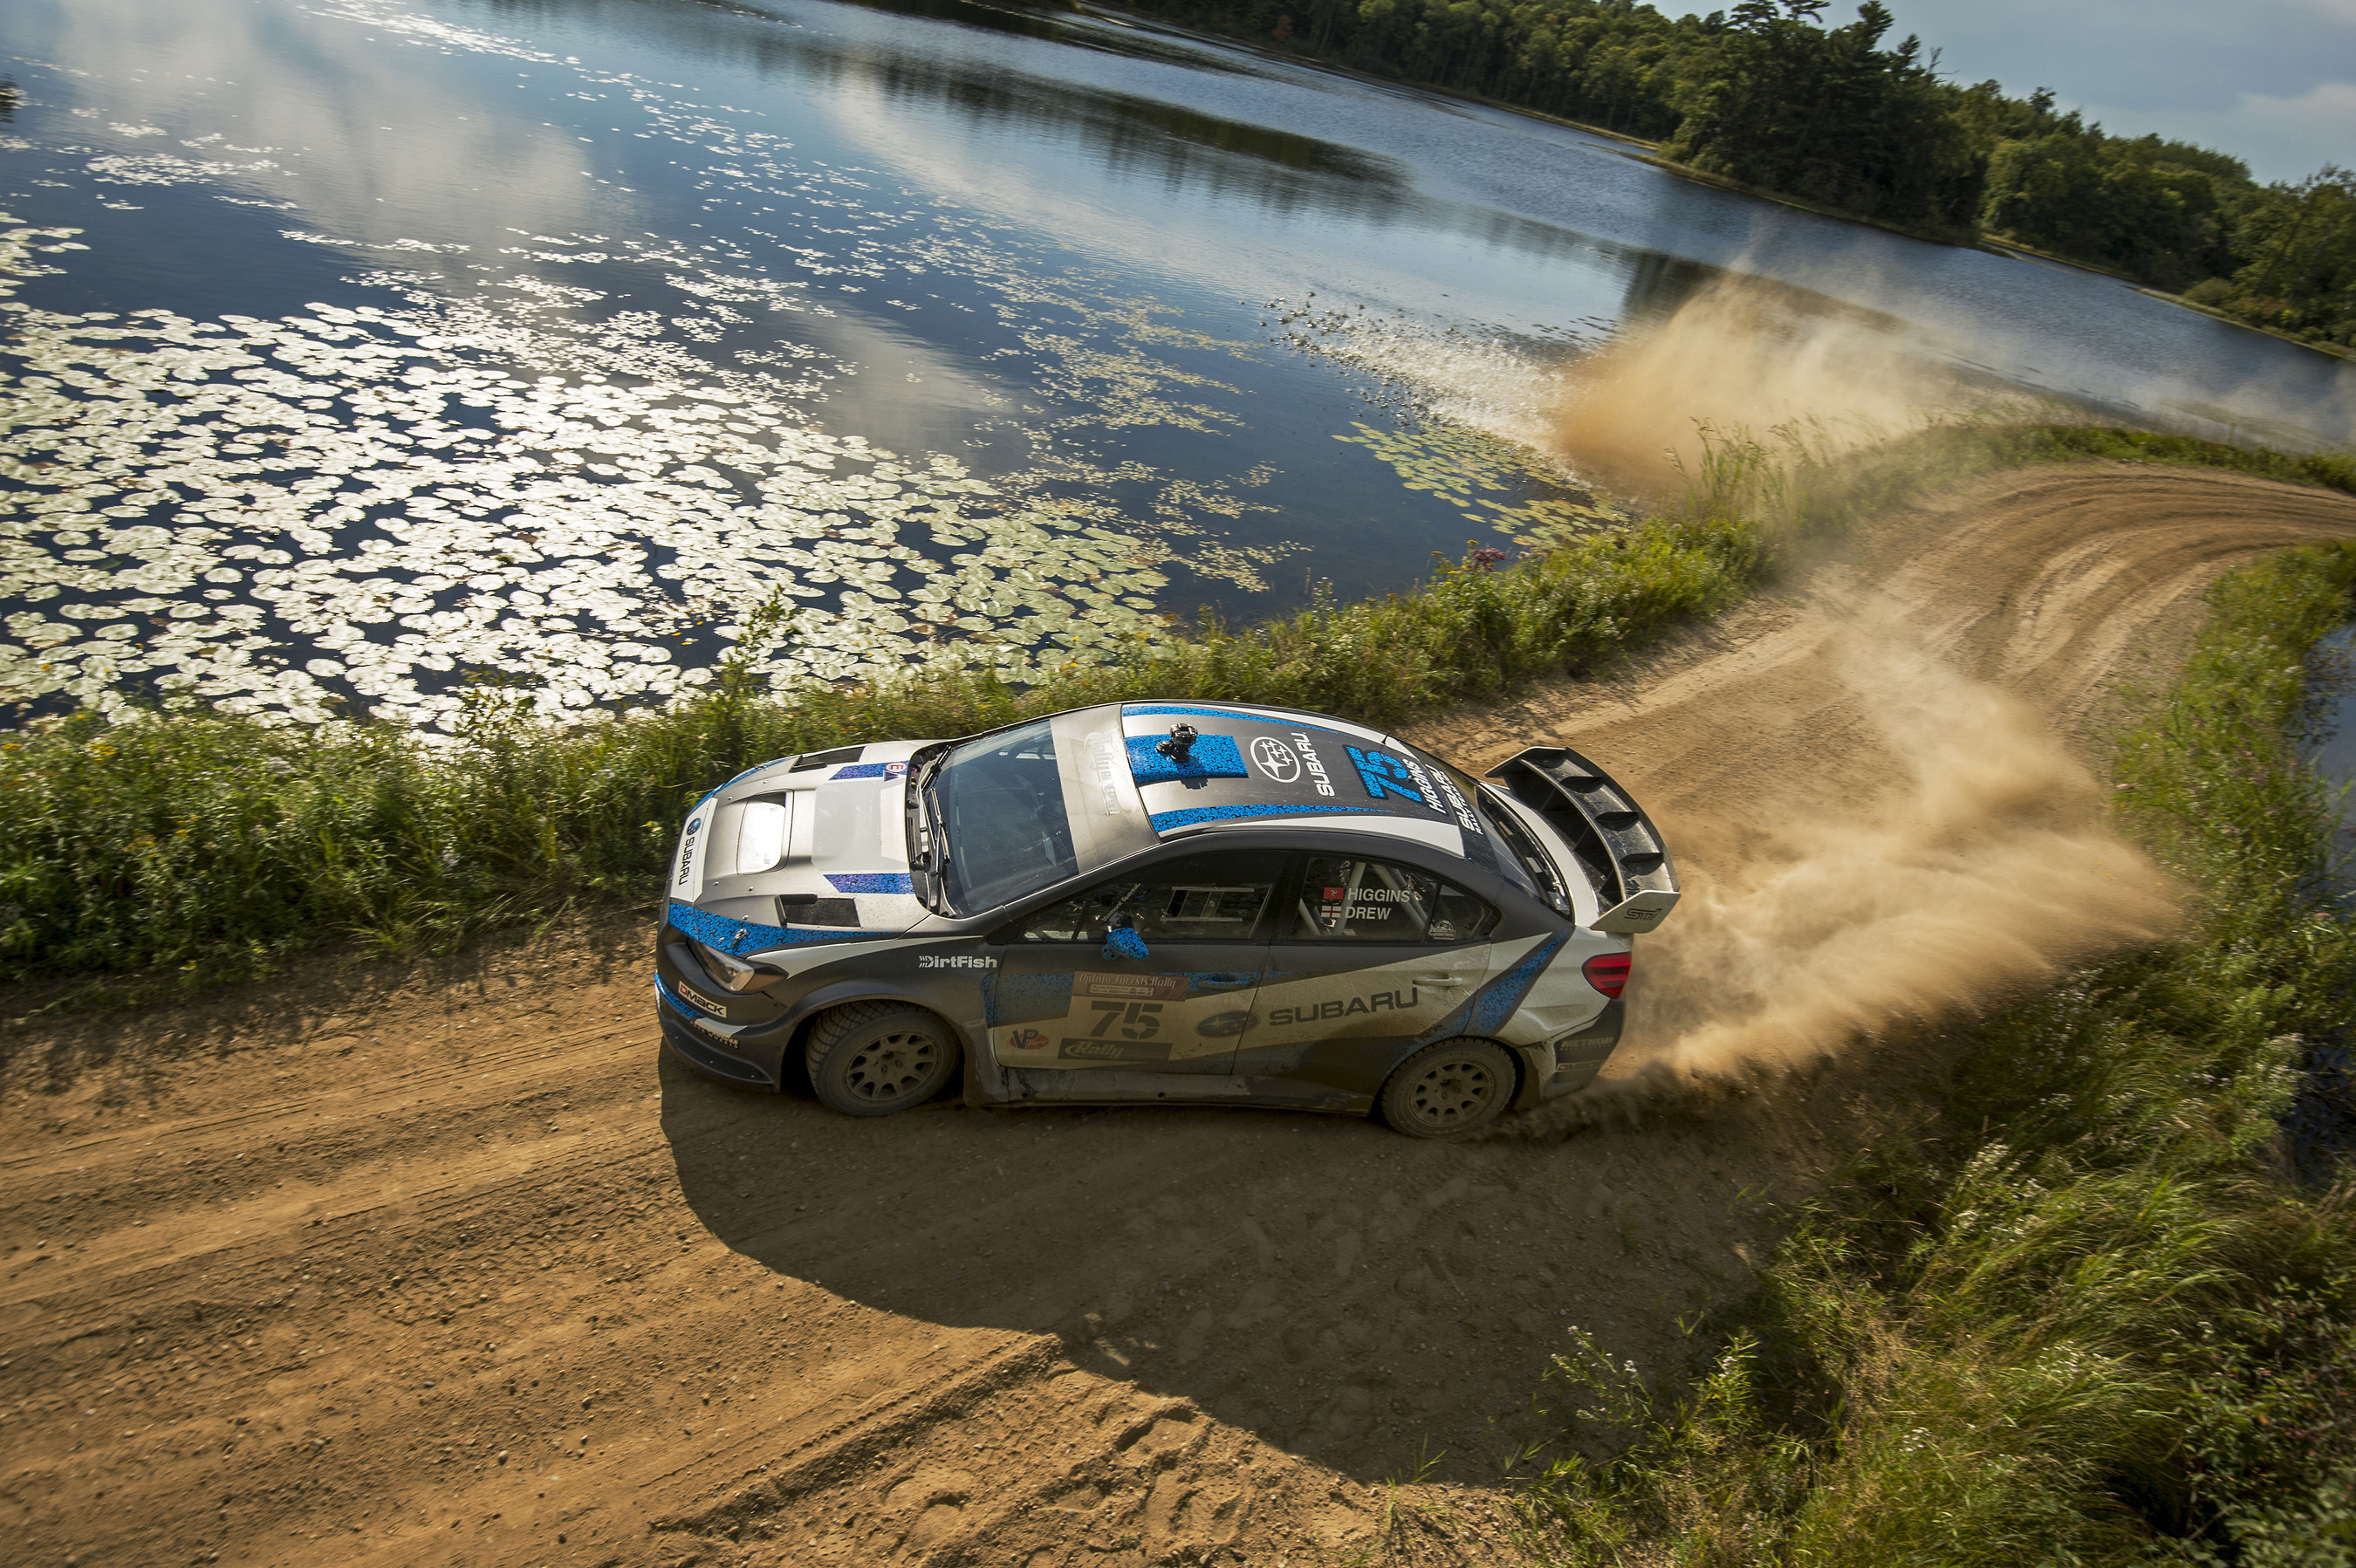 Subaru Rally Team USA driver David Higgins re-affirmed his dominance of American rallying with a faultless victory at the Ojibwe Forests Rally